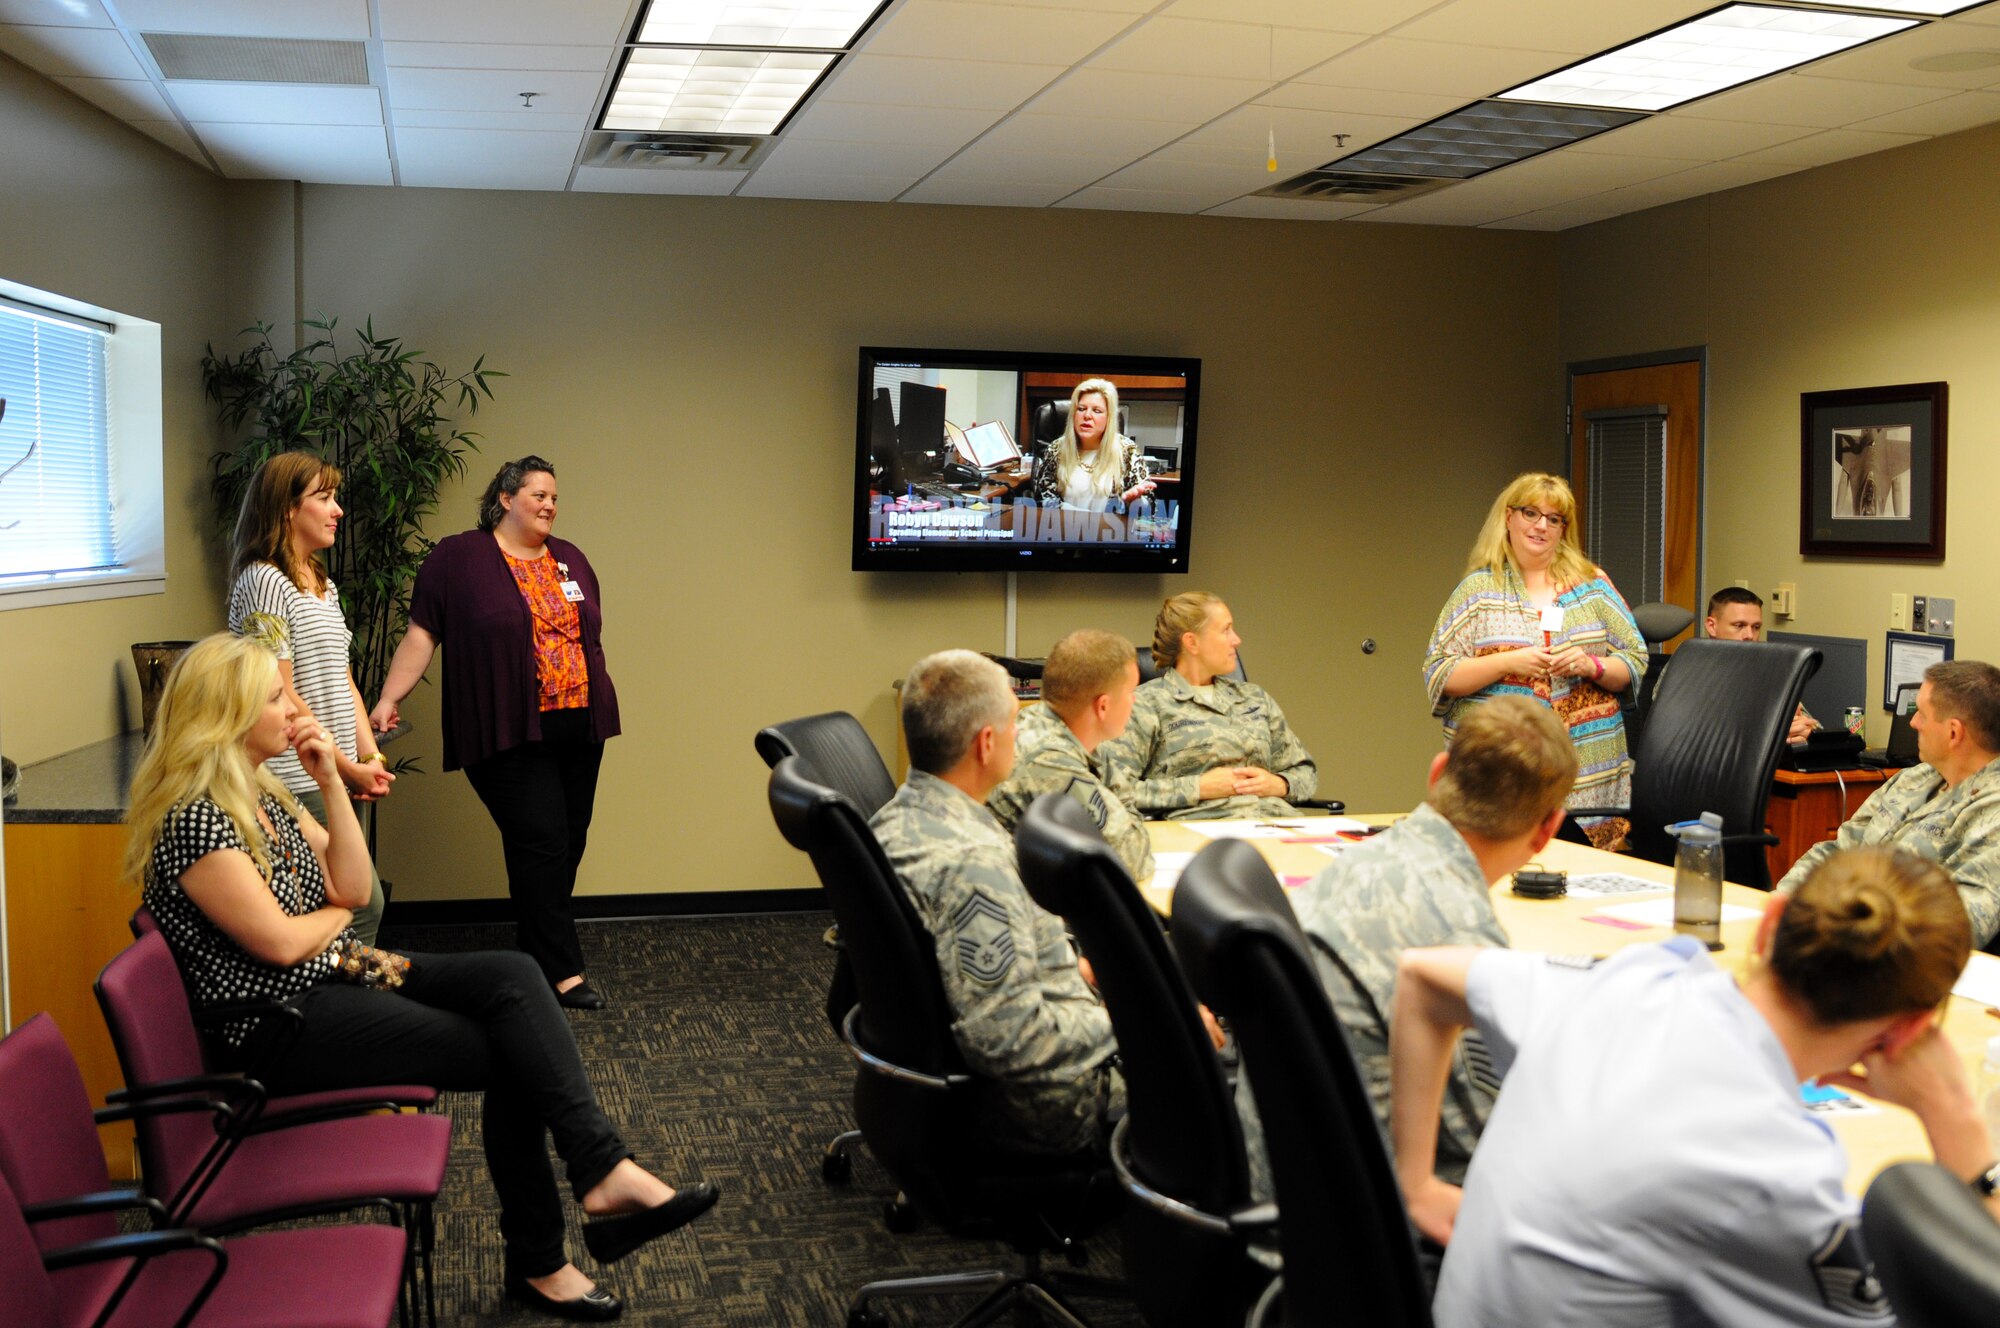 Keri Rathbun, Kimmons Jr. High assistant principal, provides insight to members of the 188th Wing at Ebbing Air National Guard Base, Fort Smith Ark., on how to be a good mentor to children Oct. 7, 2015. Rathbun, along with Eva Riley, Sutton Elementary counselor, Sarah Ray, Kimmons Jr. High counselor, and Jennie Mathews, Sutton Elementary principal, presided over the class. The 188th Wing has partnered with schools in the local community to provide mentors to children within the program. The mentorship program is designed to enhance the presence of positive role models in children’s lives. (U.S. Air National Guard photo by Senior Airman Cody Martin/Released)